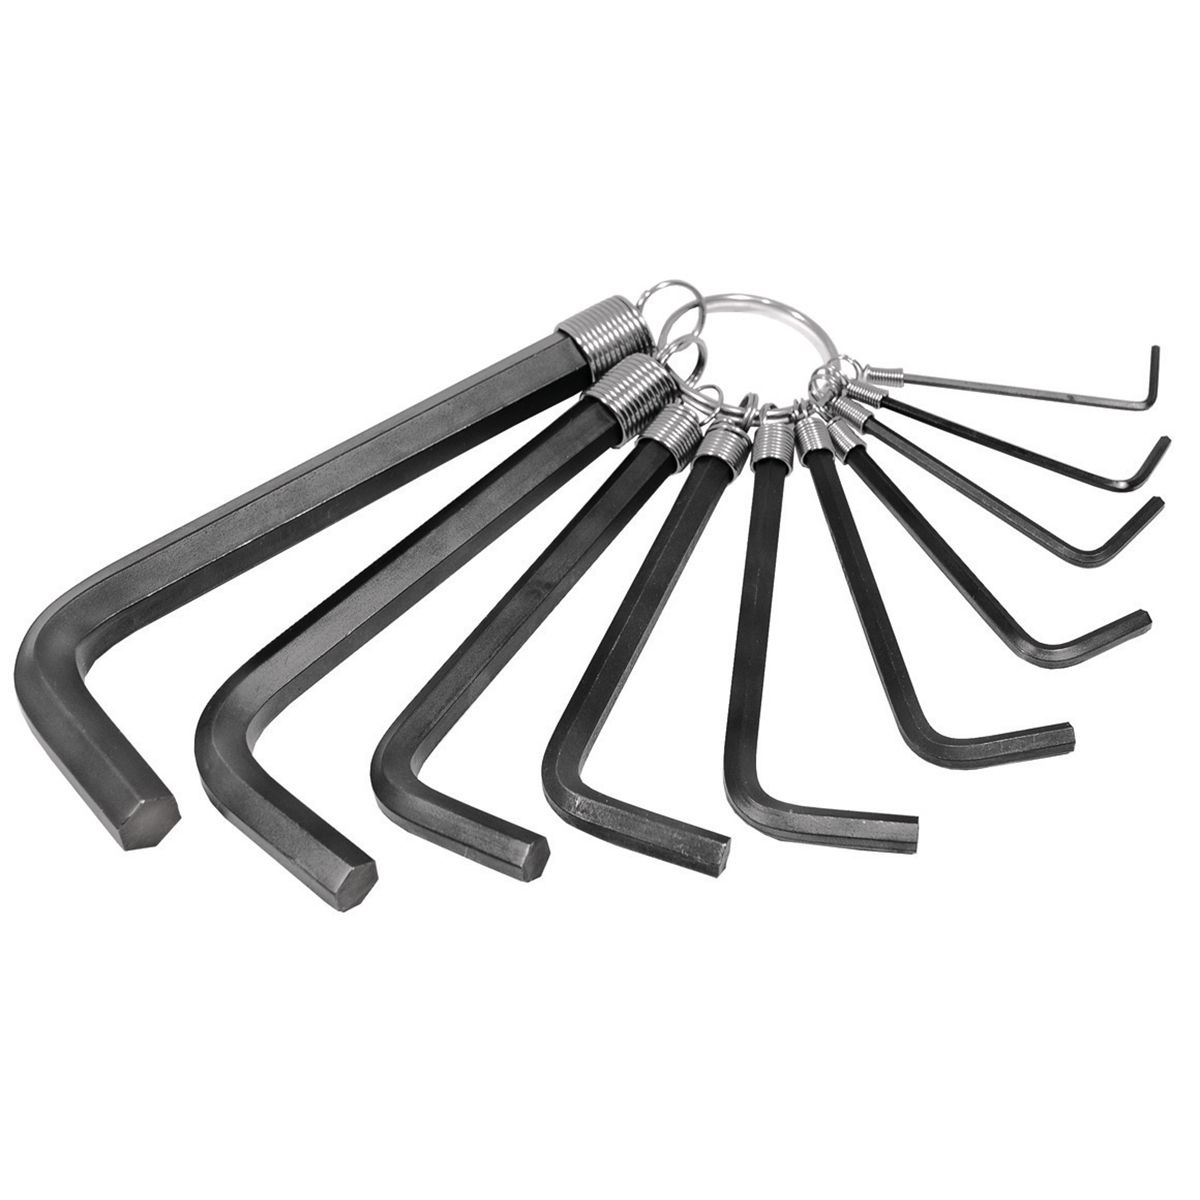 Hex Key Set on a Ring - 10 Piece - 1.5mm-10mm